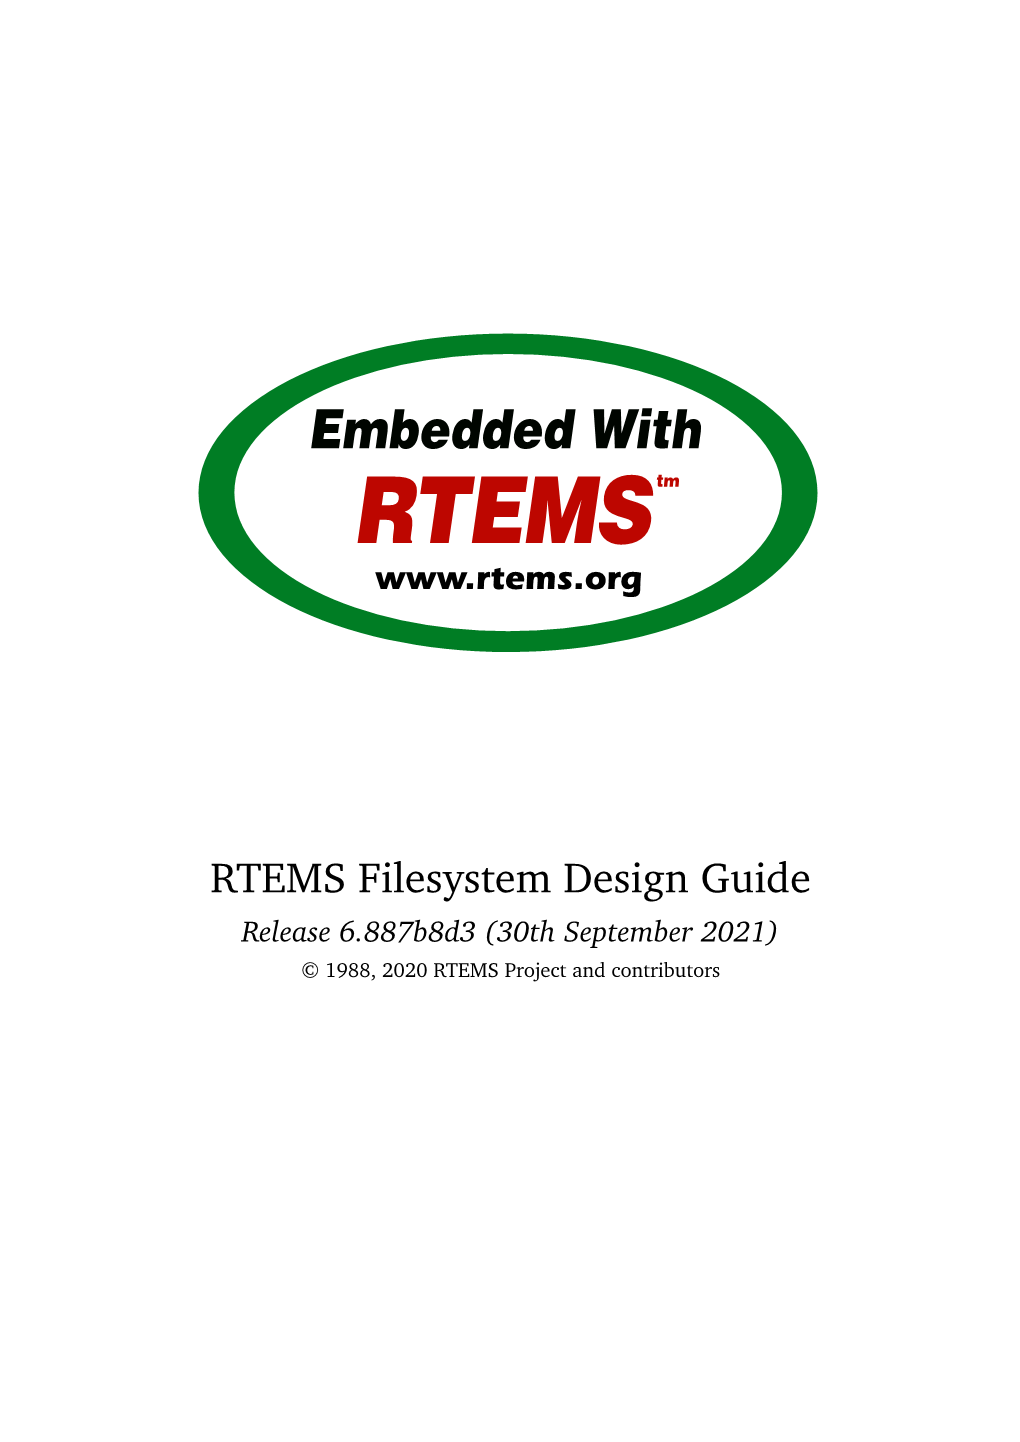 RTEMS Filesystem Design Guide Release 6.887B8d3 (30Th September 2021) © 1988, 2020 RTEMS Project and Contributors